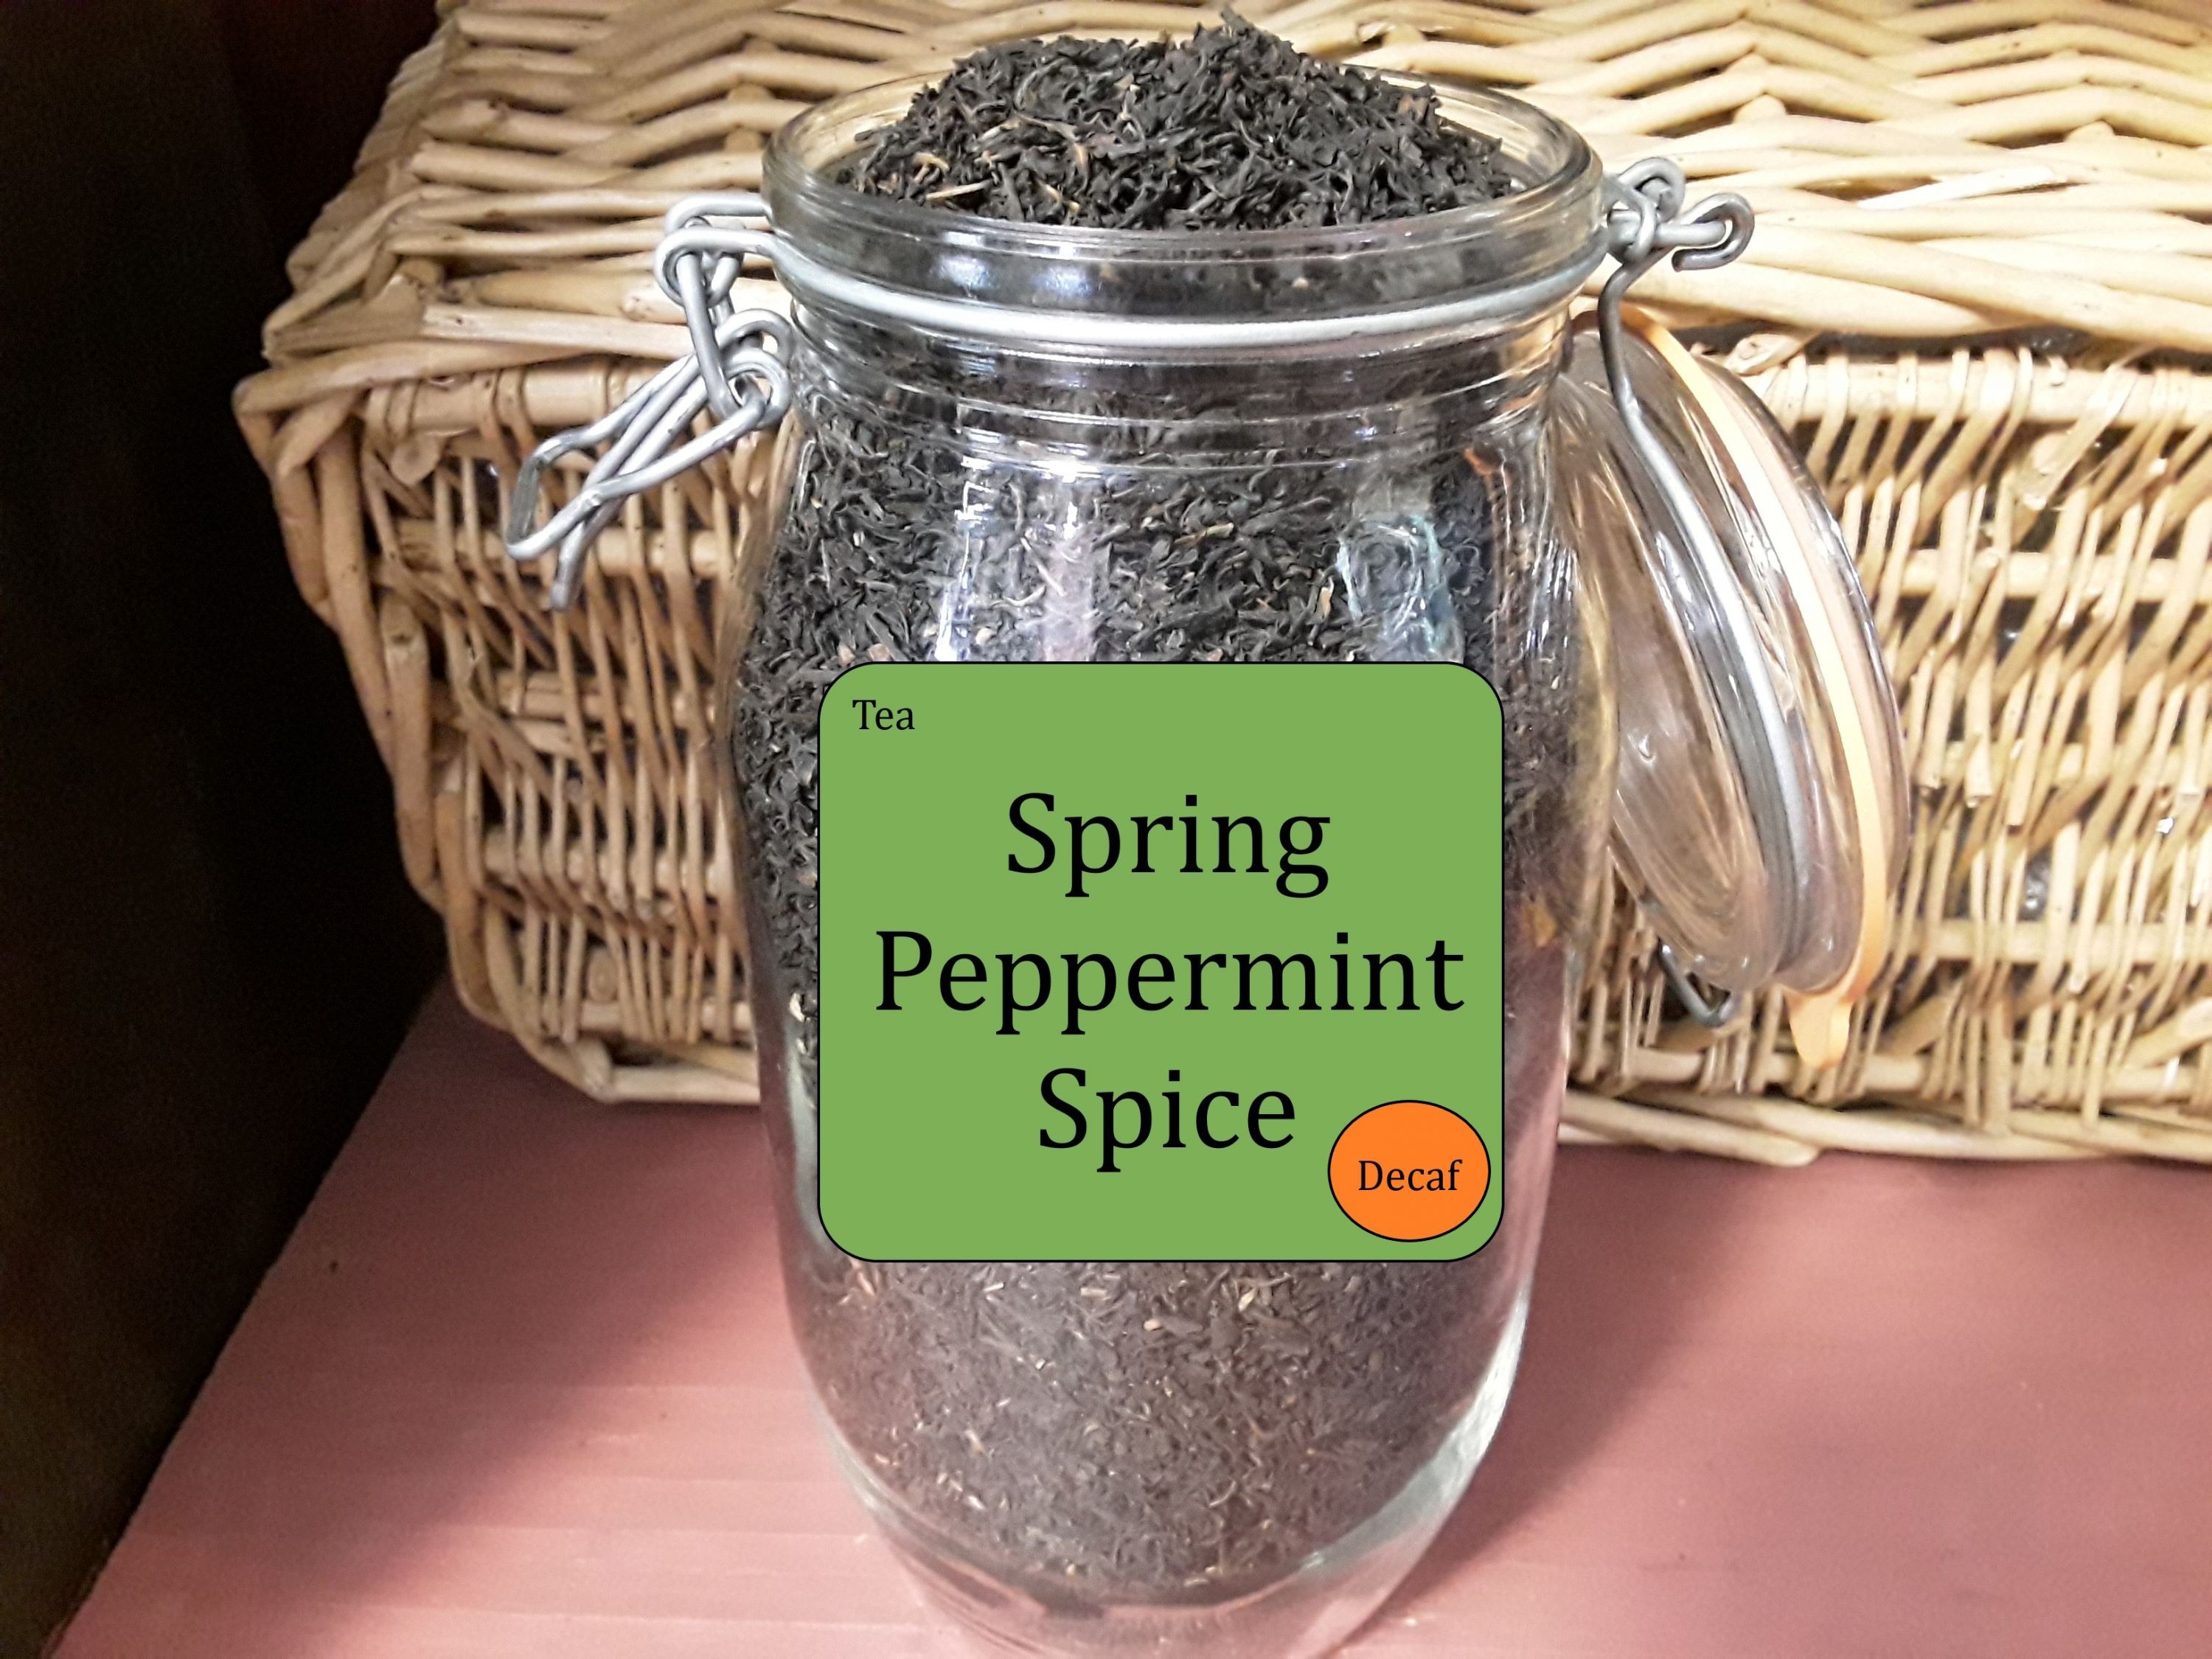 Decaf Spring Peppermint Spice Black loose leaf tea. For sale by the 1/2